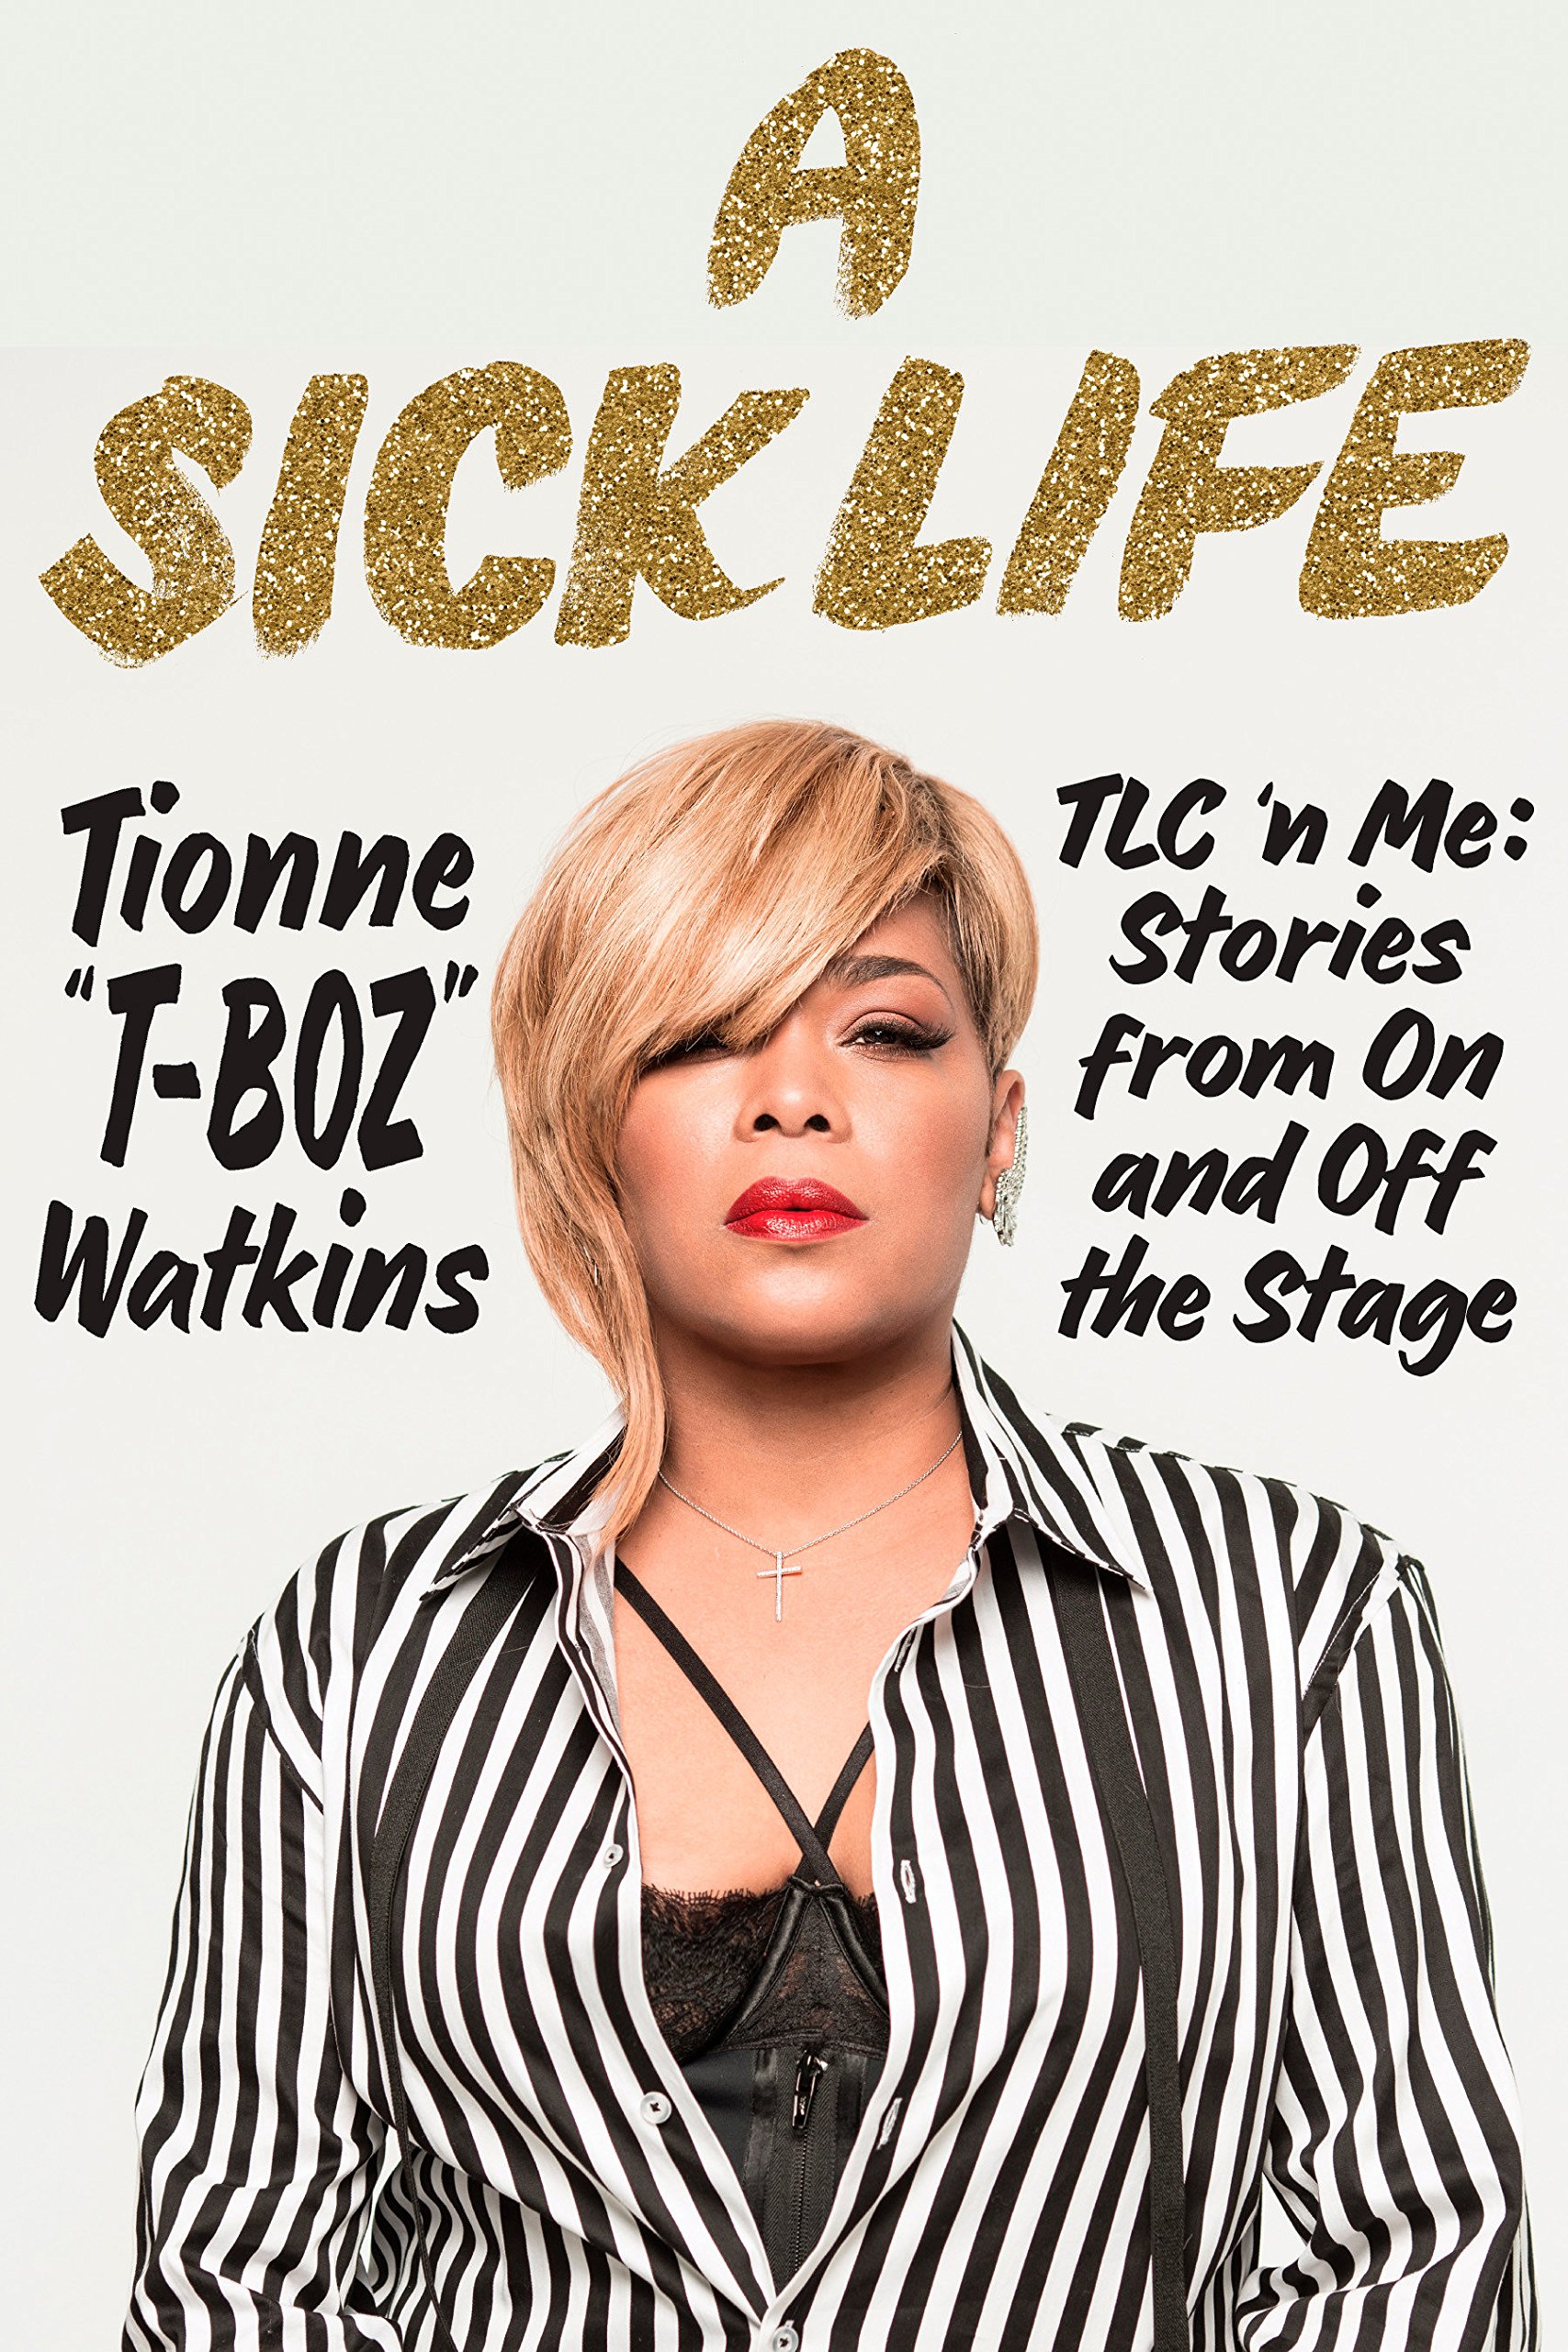 A picture of Tionne Watkins book cover.